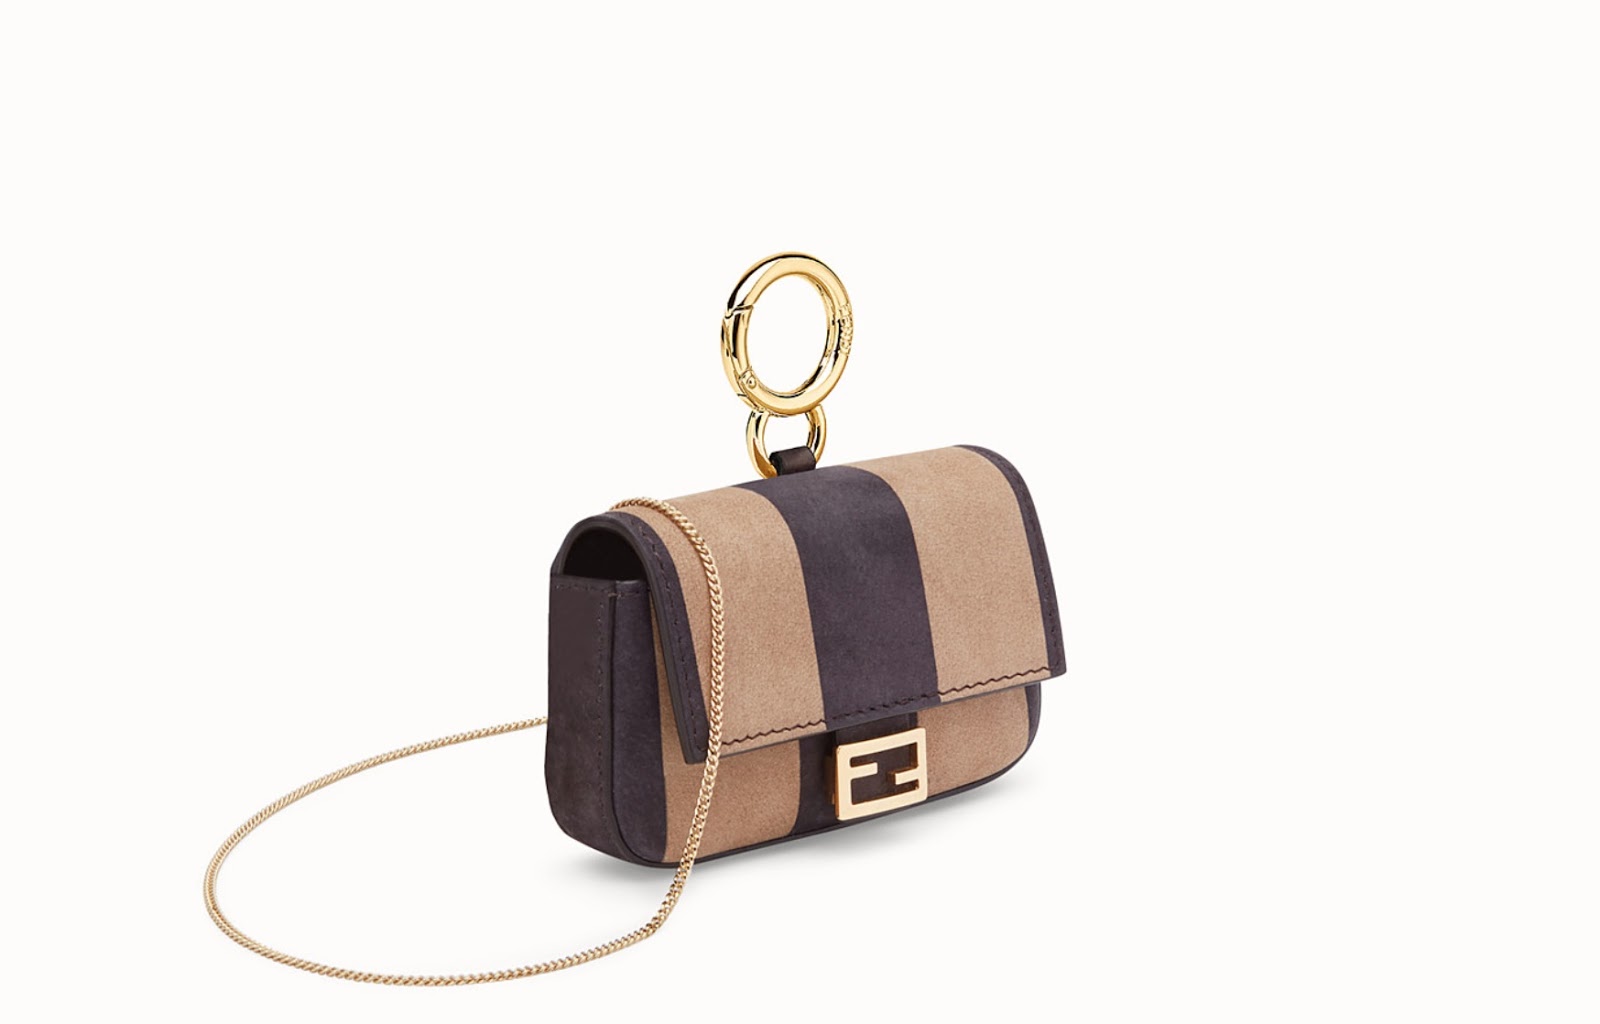 DIARY OF A CLOTHESHORSE: THIS WEEK'S MOST WANTED FROM FENDI